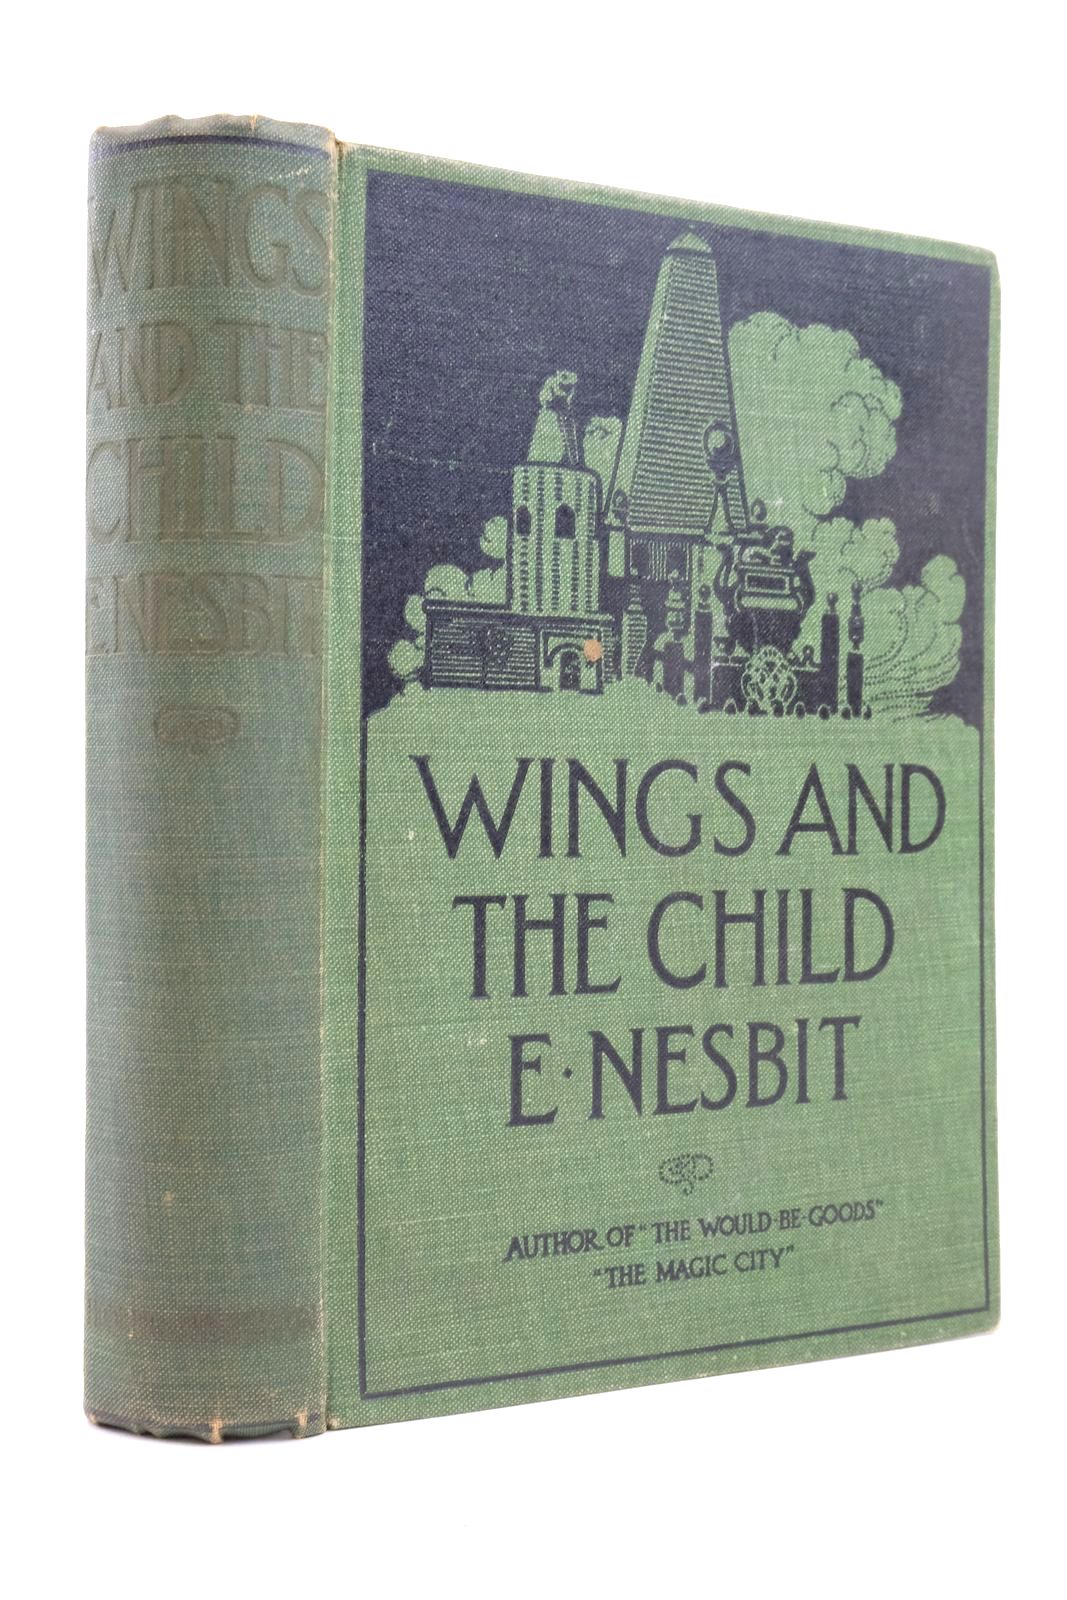 Photo of WINGS AND THE CHILD- Stock Number: 2138090